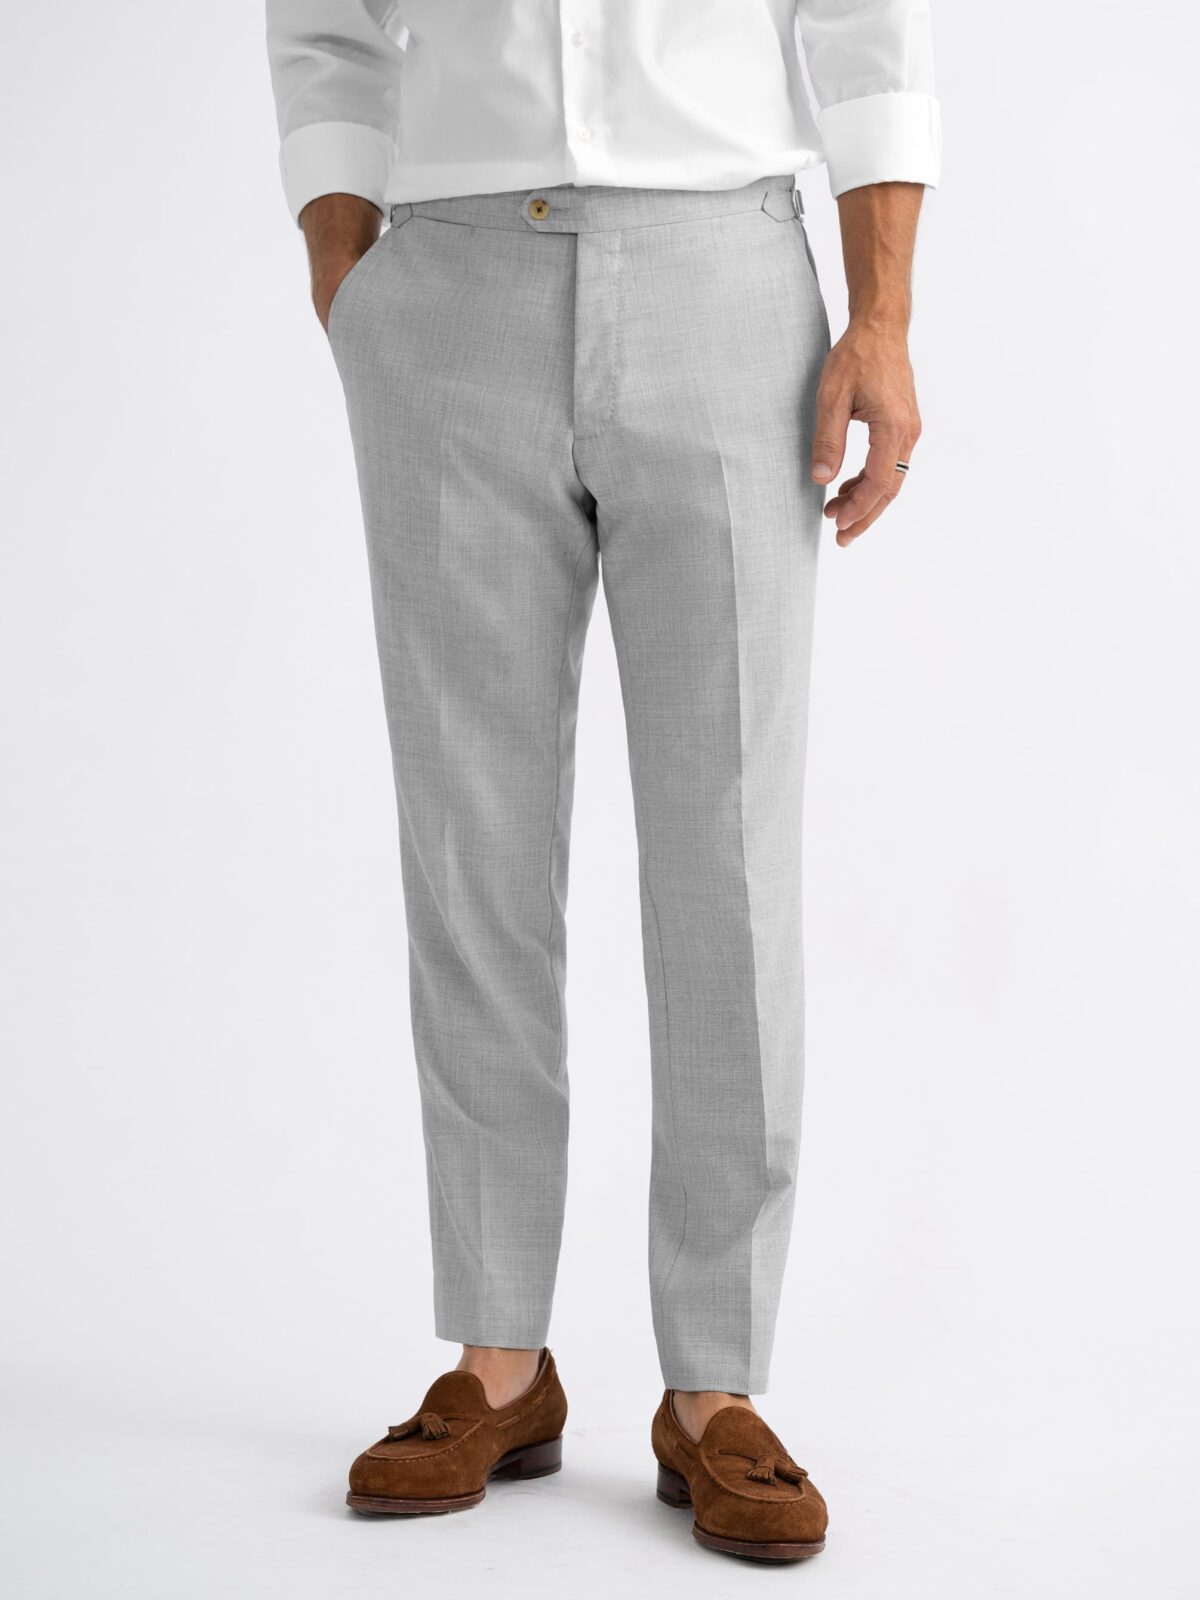 Japanese Linen Wool Mara Trouser in Natural and Grey | Cawley | Covet + Lou